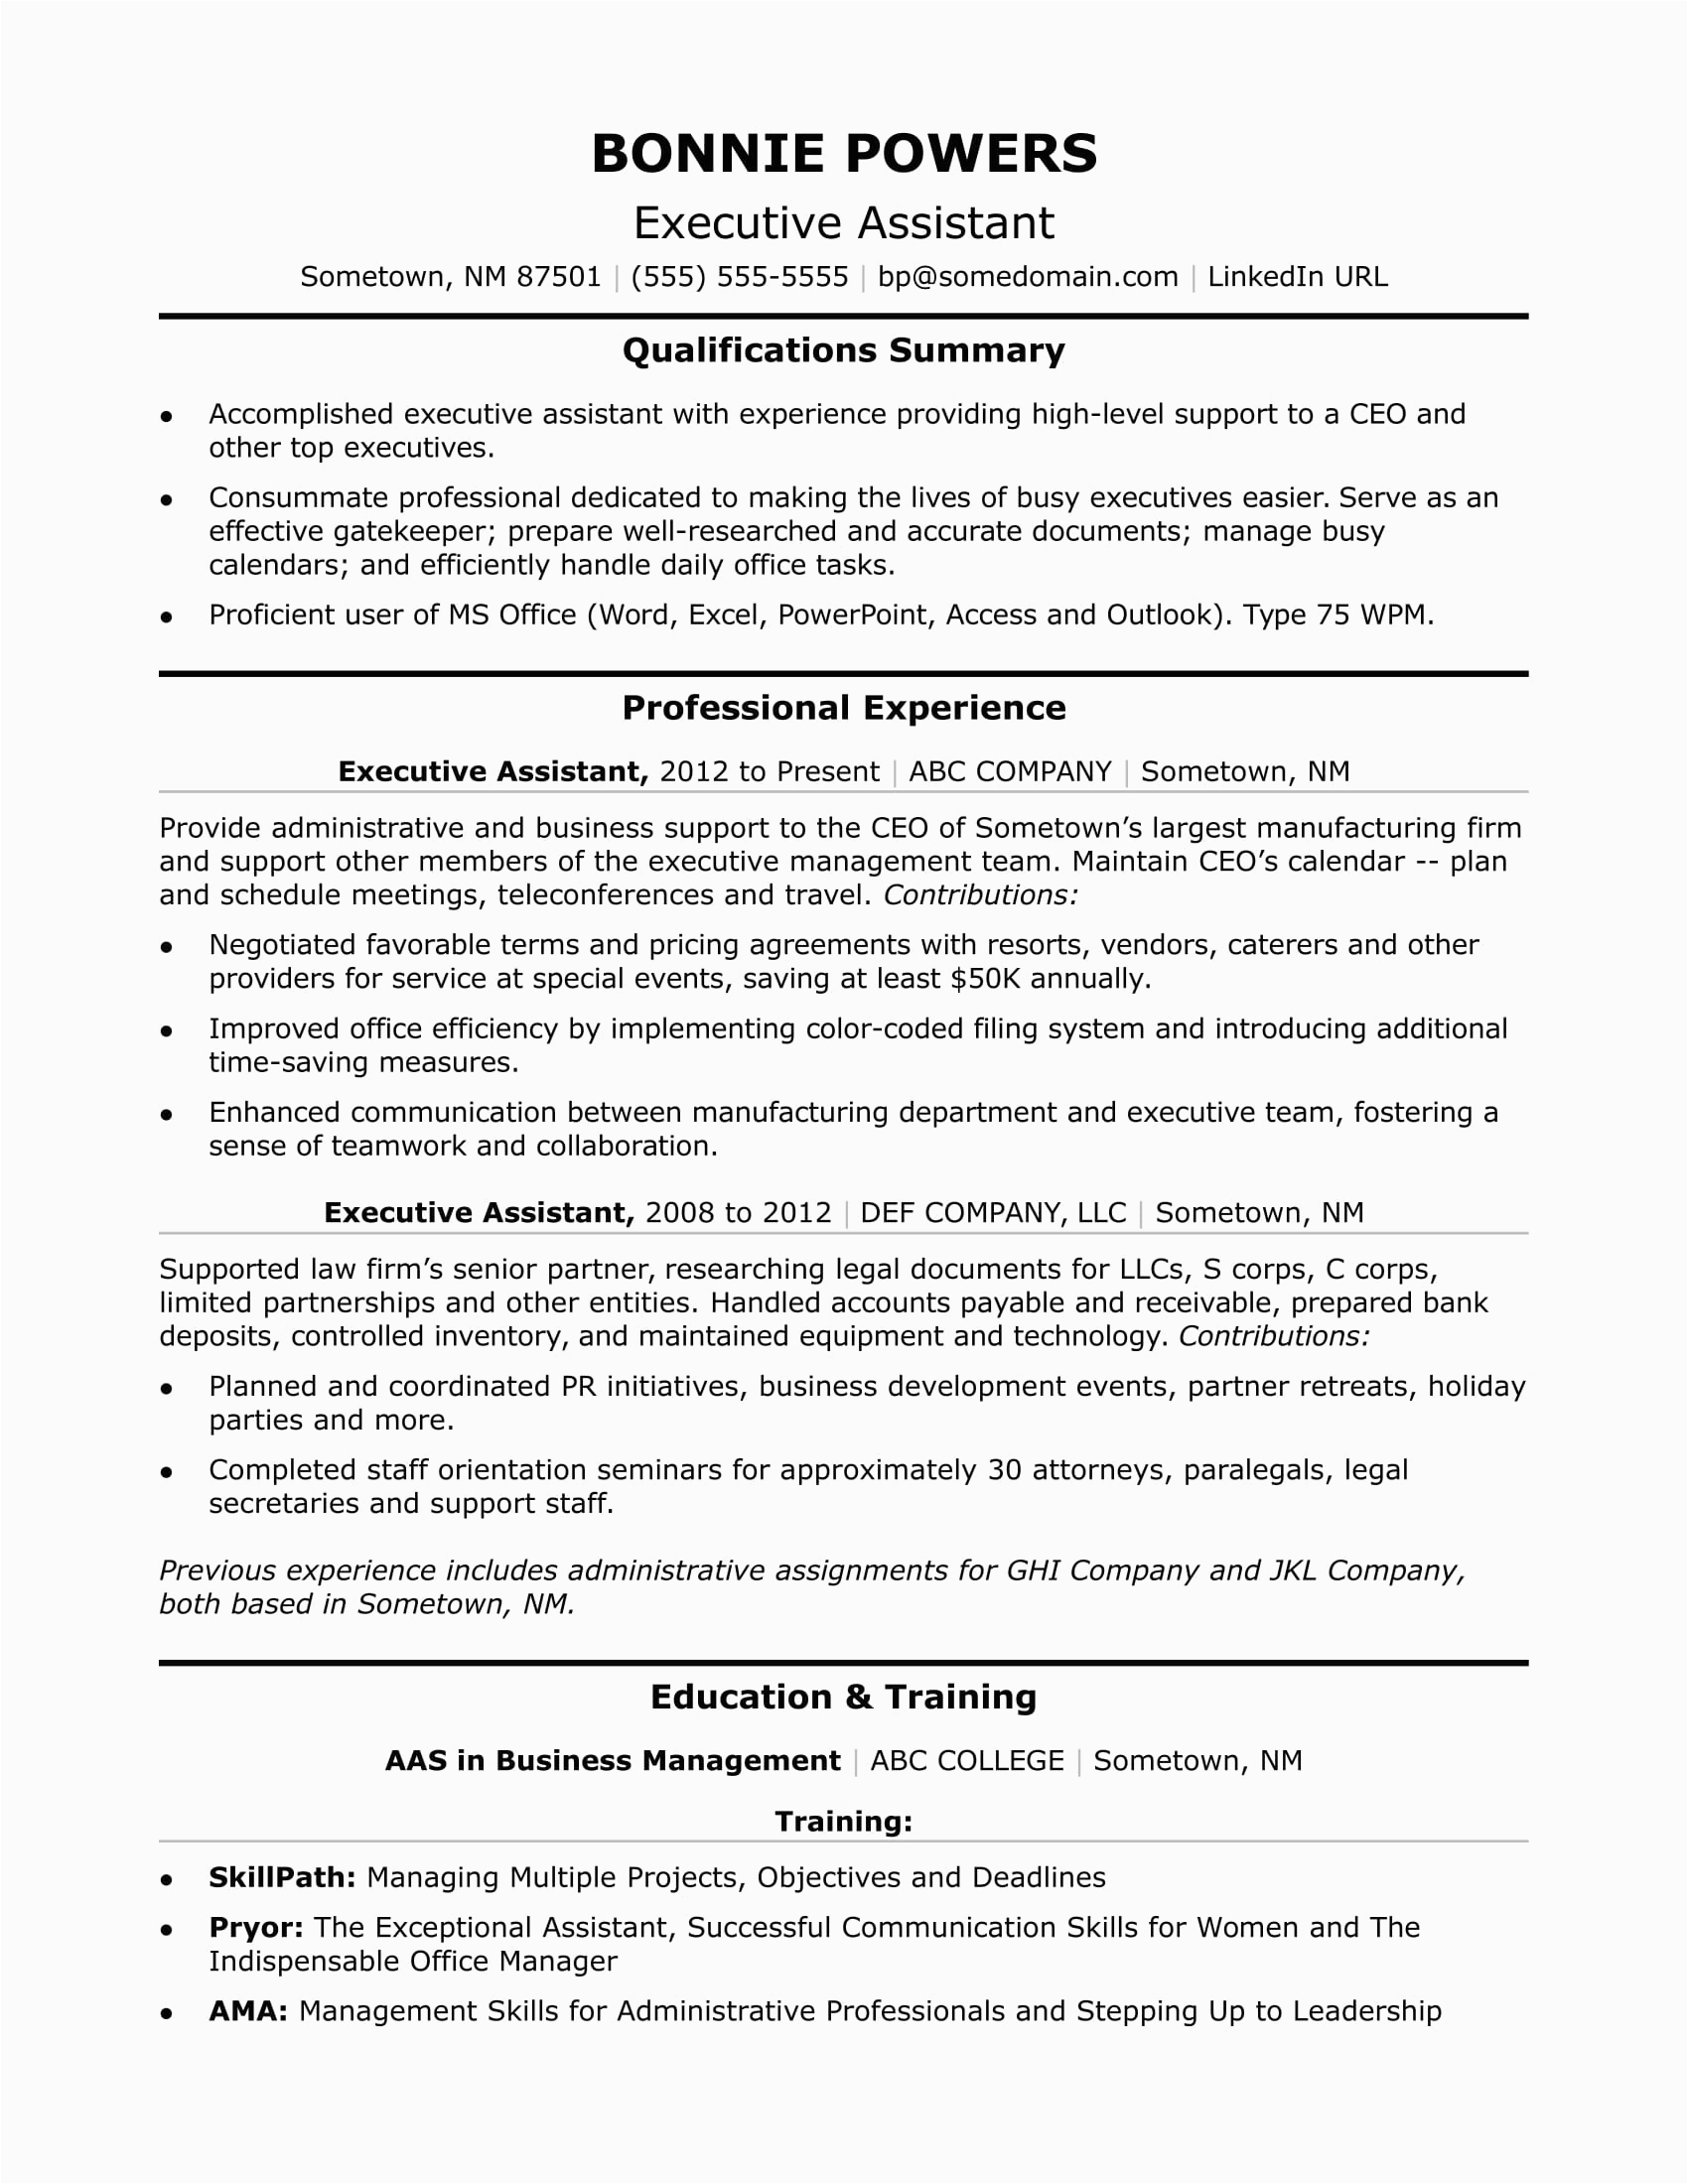 Sample Resume for Executive assistant to Senior Executive Executive Administrative assistant Resume Sample